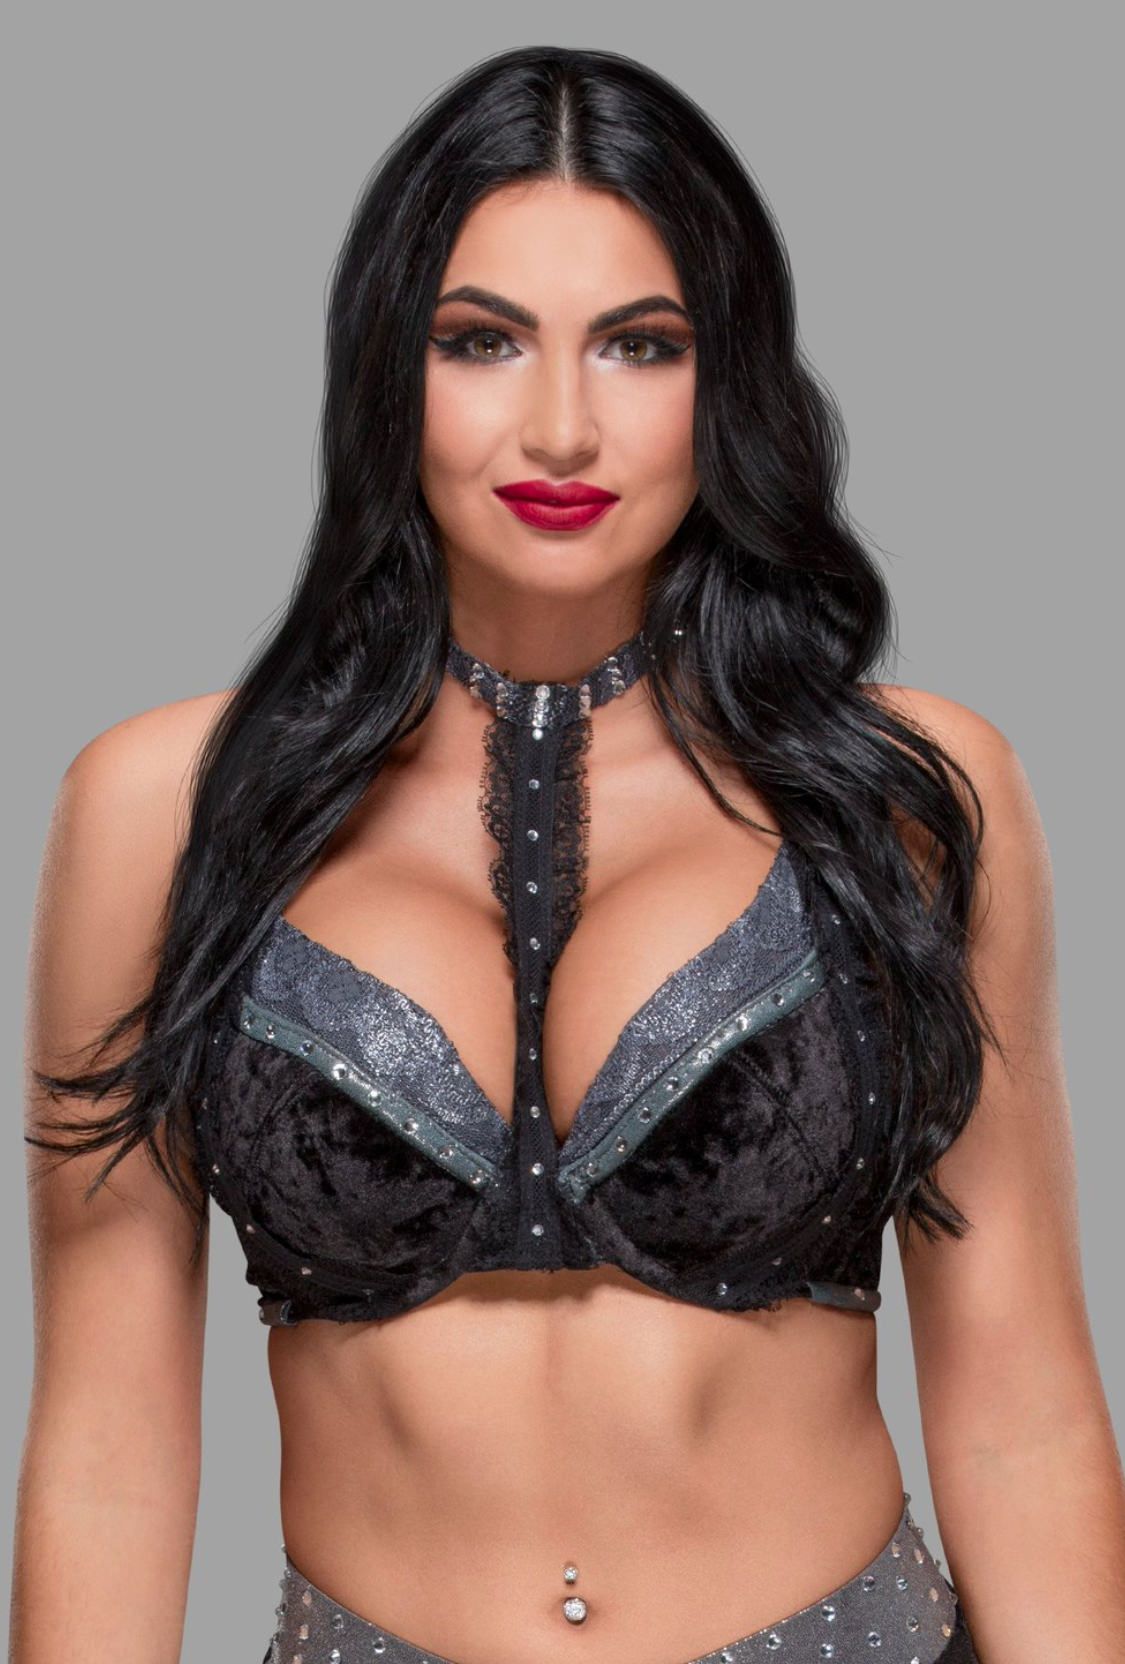 Billie Kay sexy cleavages